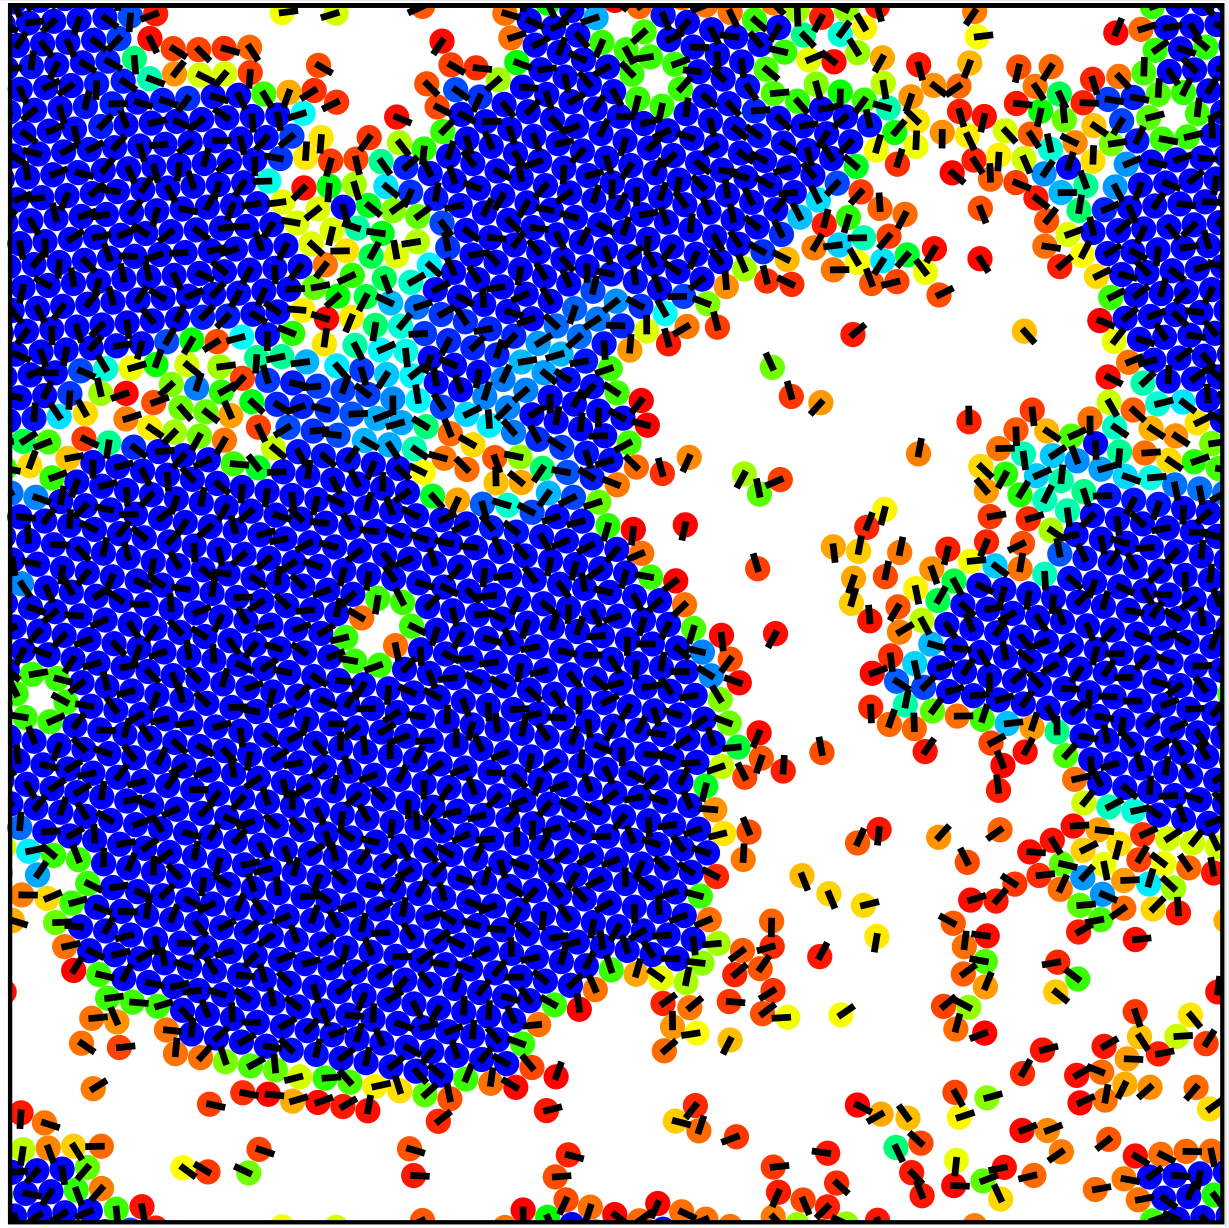 Collective dynamics of active Brownian particles